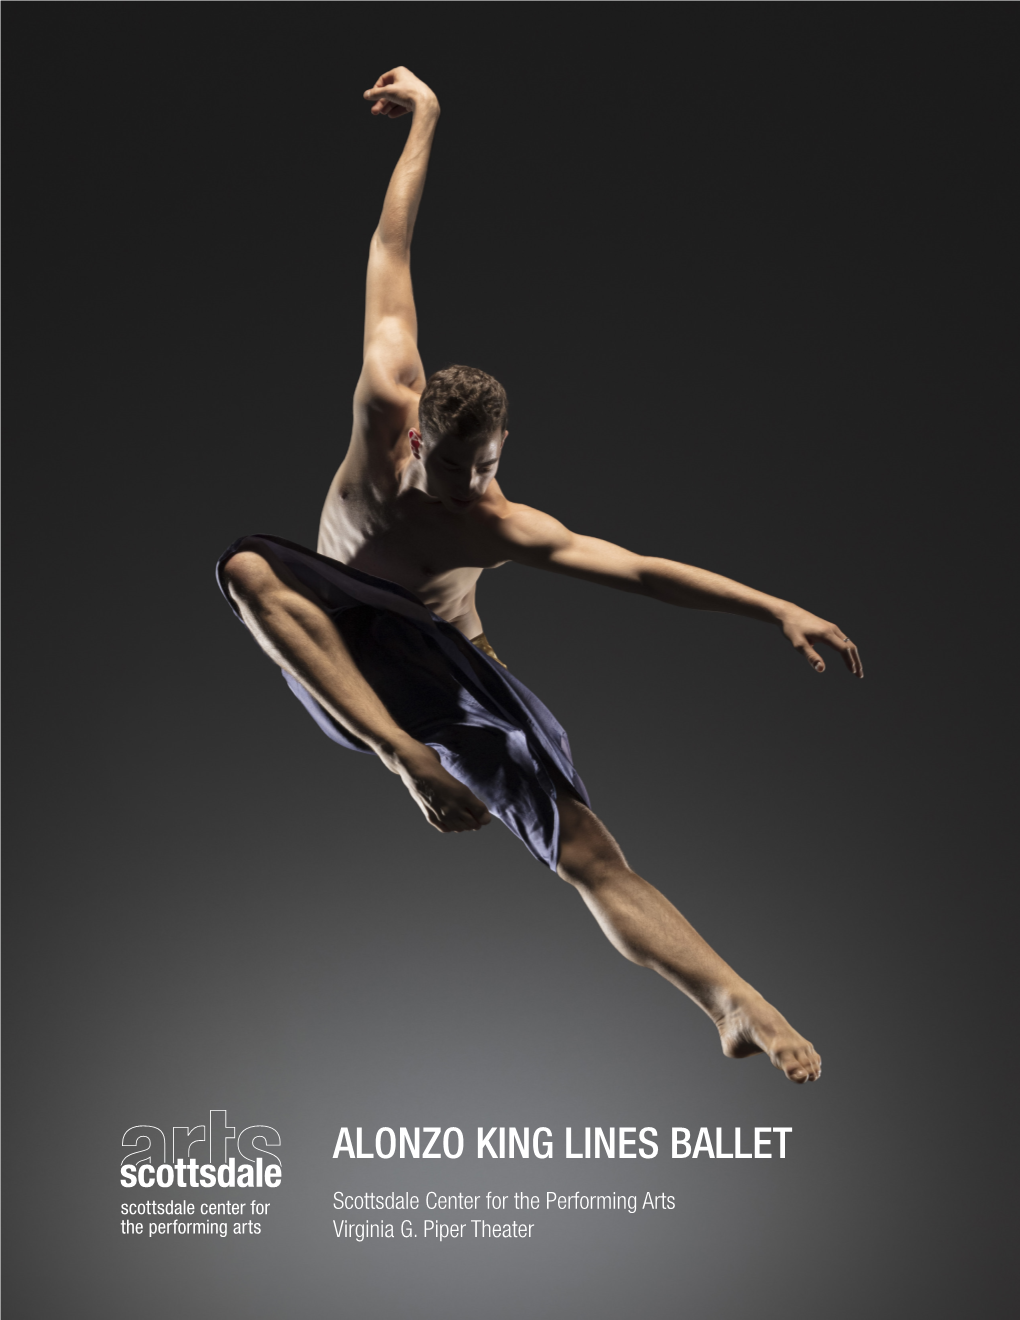 ALONZO KING LINES BALLET Scottsdale Center for the Performing Arts Virginia G